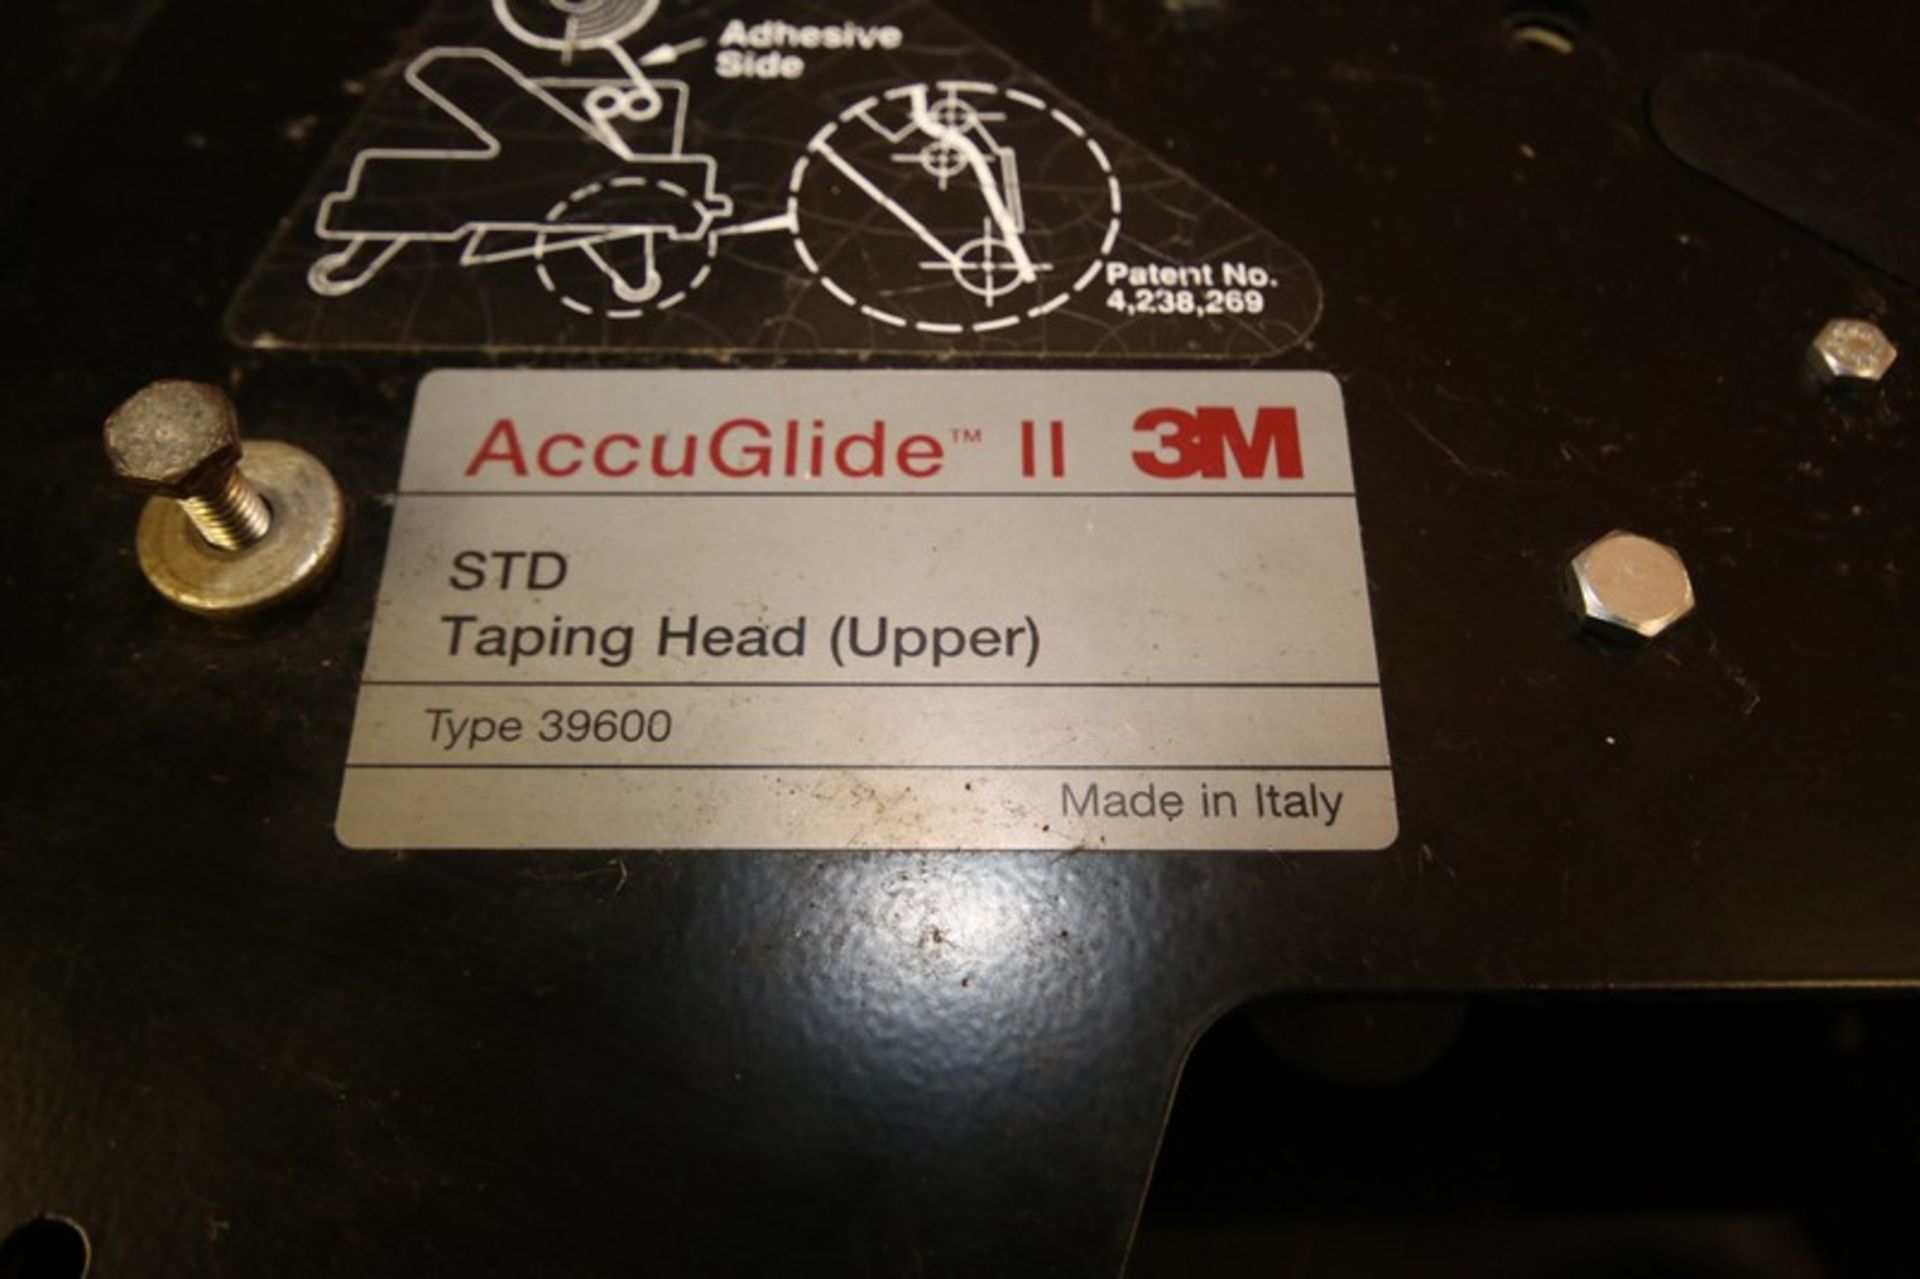 Lot of (2) 3M AccuGlide II 3" STD Taping Head, (for Case Sealer) (INV#103632) (Located at the MDG - Image 4 of 4